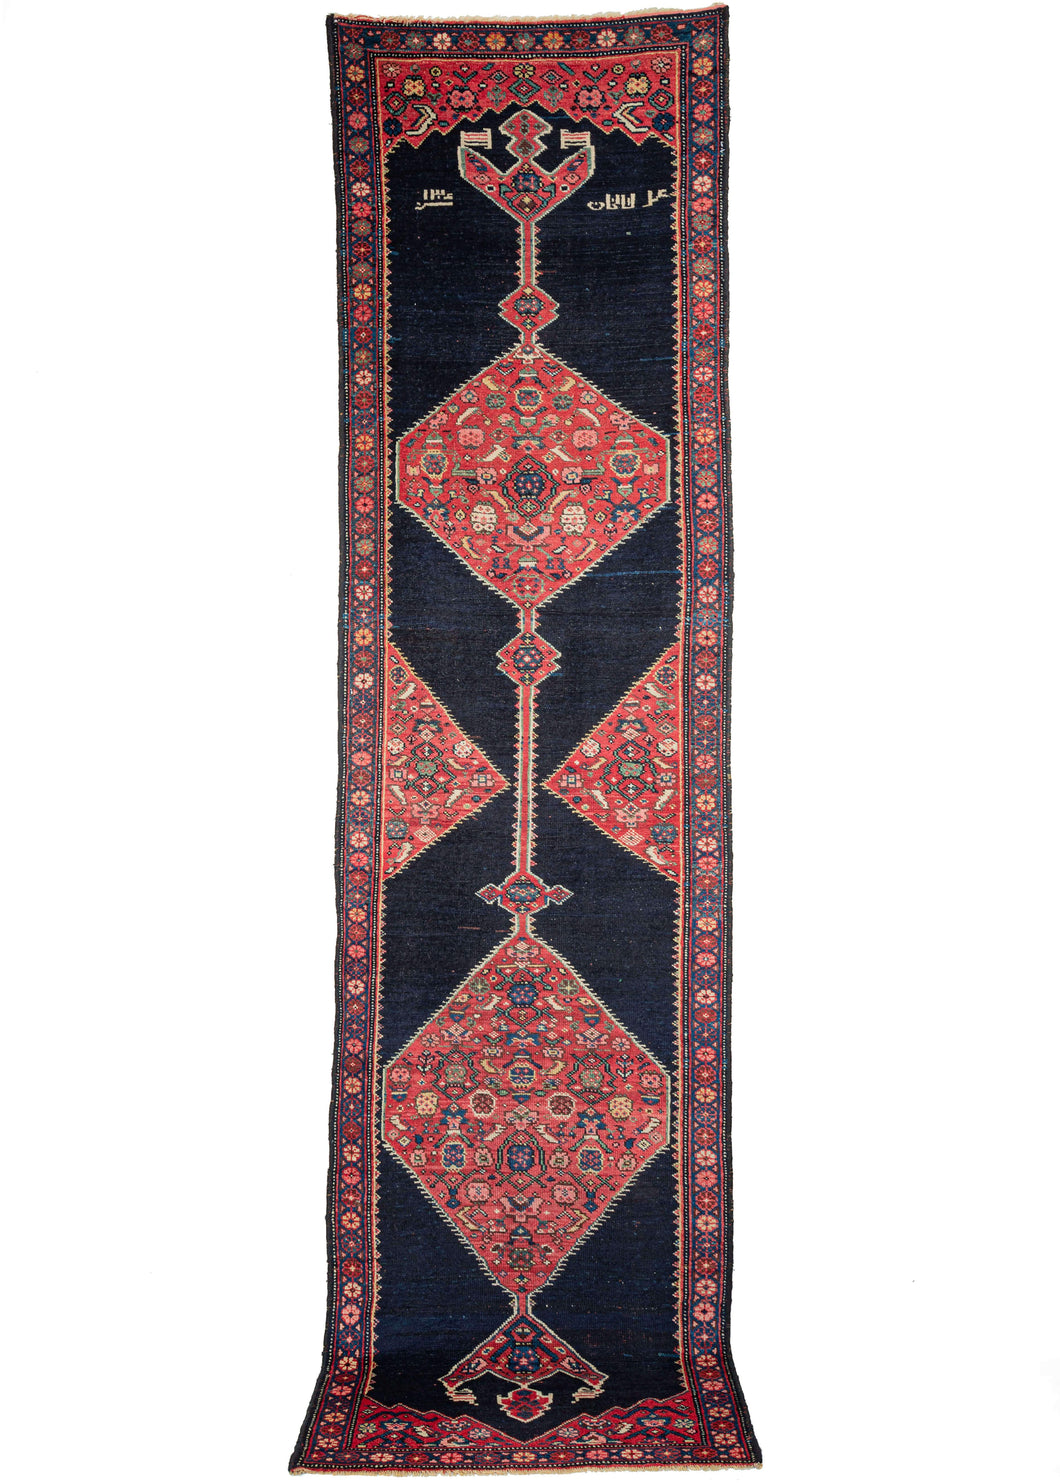 Anntique NW Persian Kurdish runner featuring composed of two red grounded lozenges filled with a variation on the classic Herati pattern. This is contrasted by the simple yet very deep navy field. There is a date (1306) and the word 